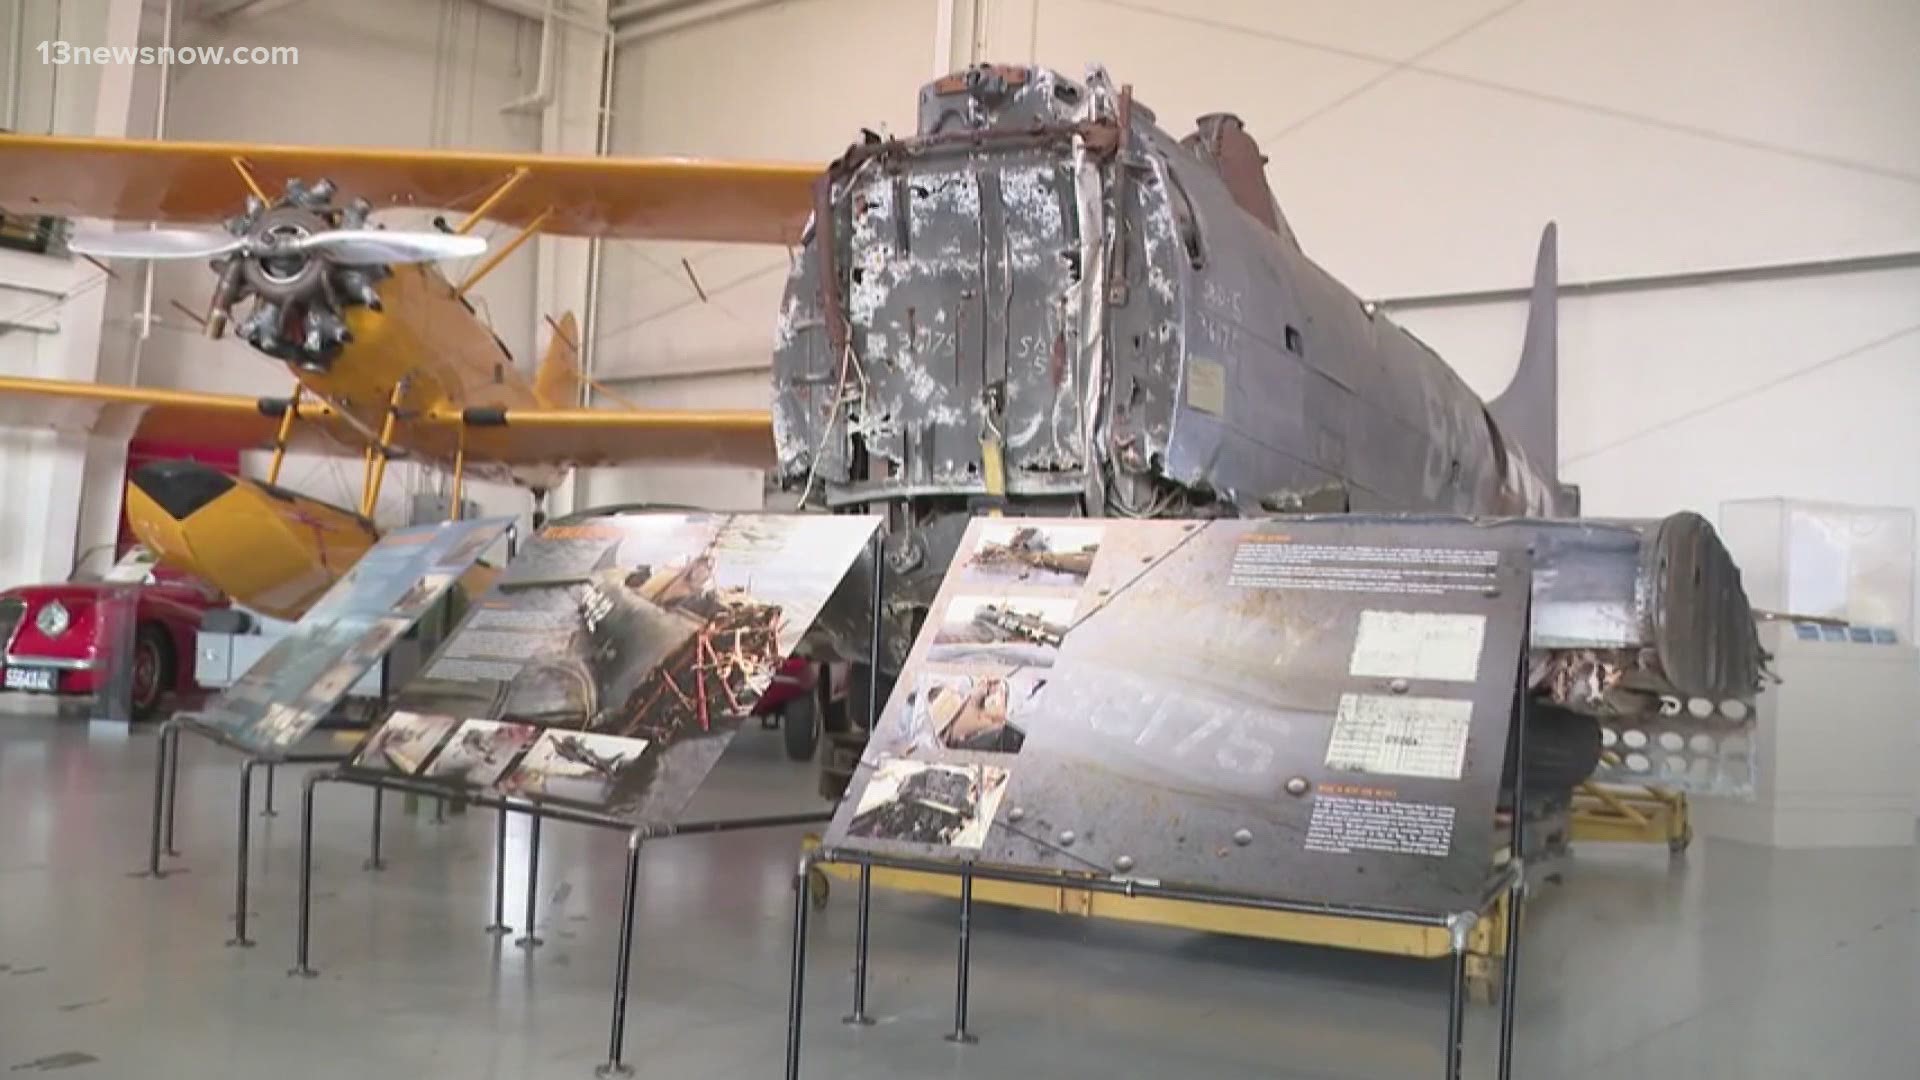 The Dauntless Dive Bomber is being repaired with the help of the Military Aviation Museum in Virginia Beach, after years of sitting at the bottom of Lake Michigan.